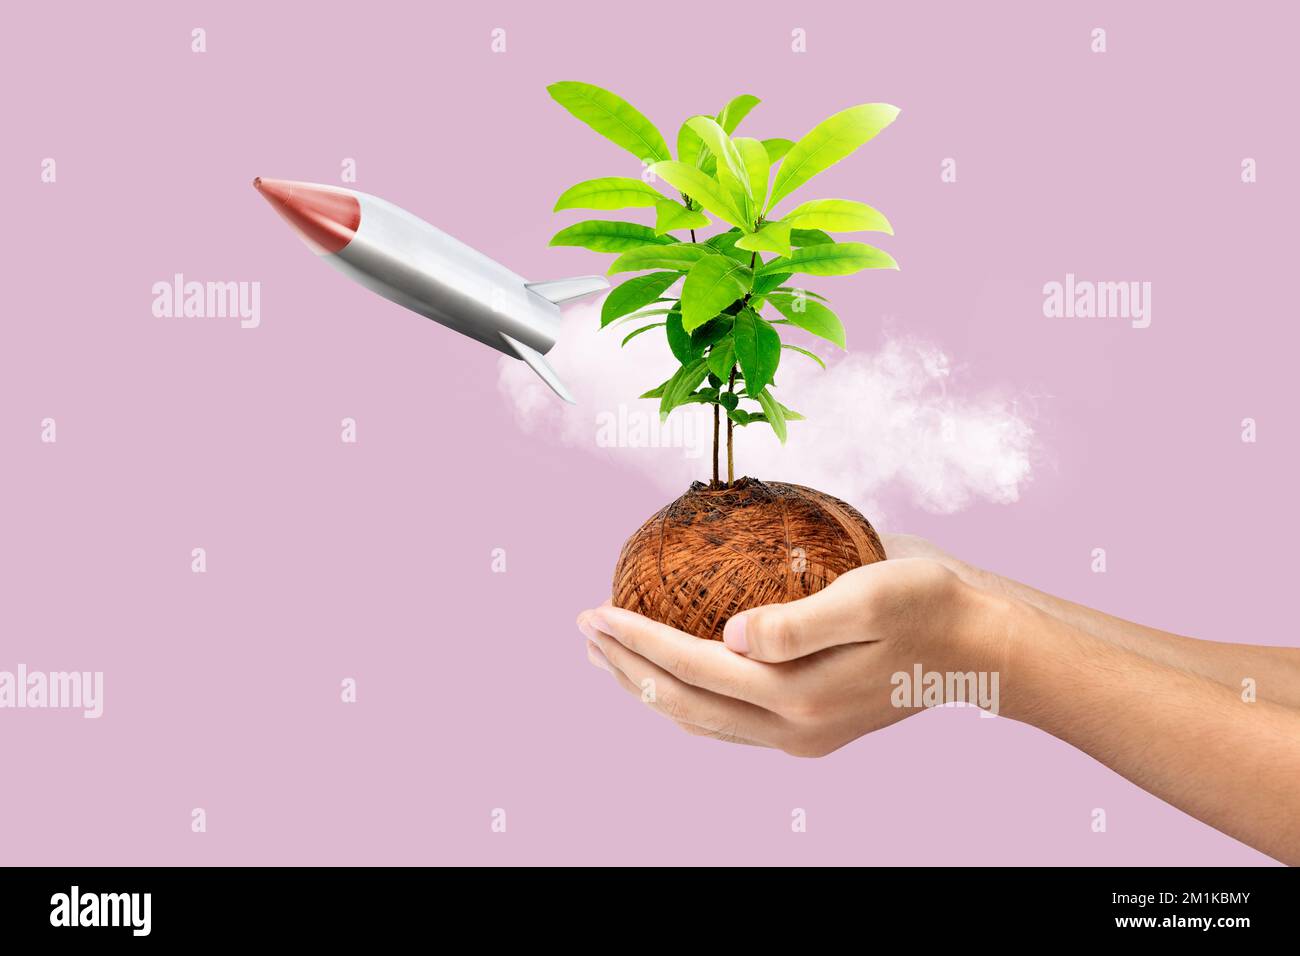 Human hand holding a growing leaf with a flying rocket on a colored background. National Science Day Stock Photo